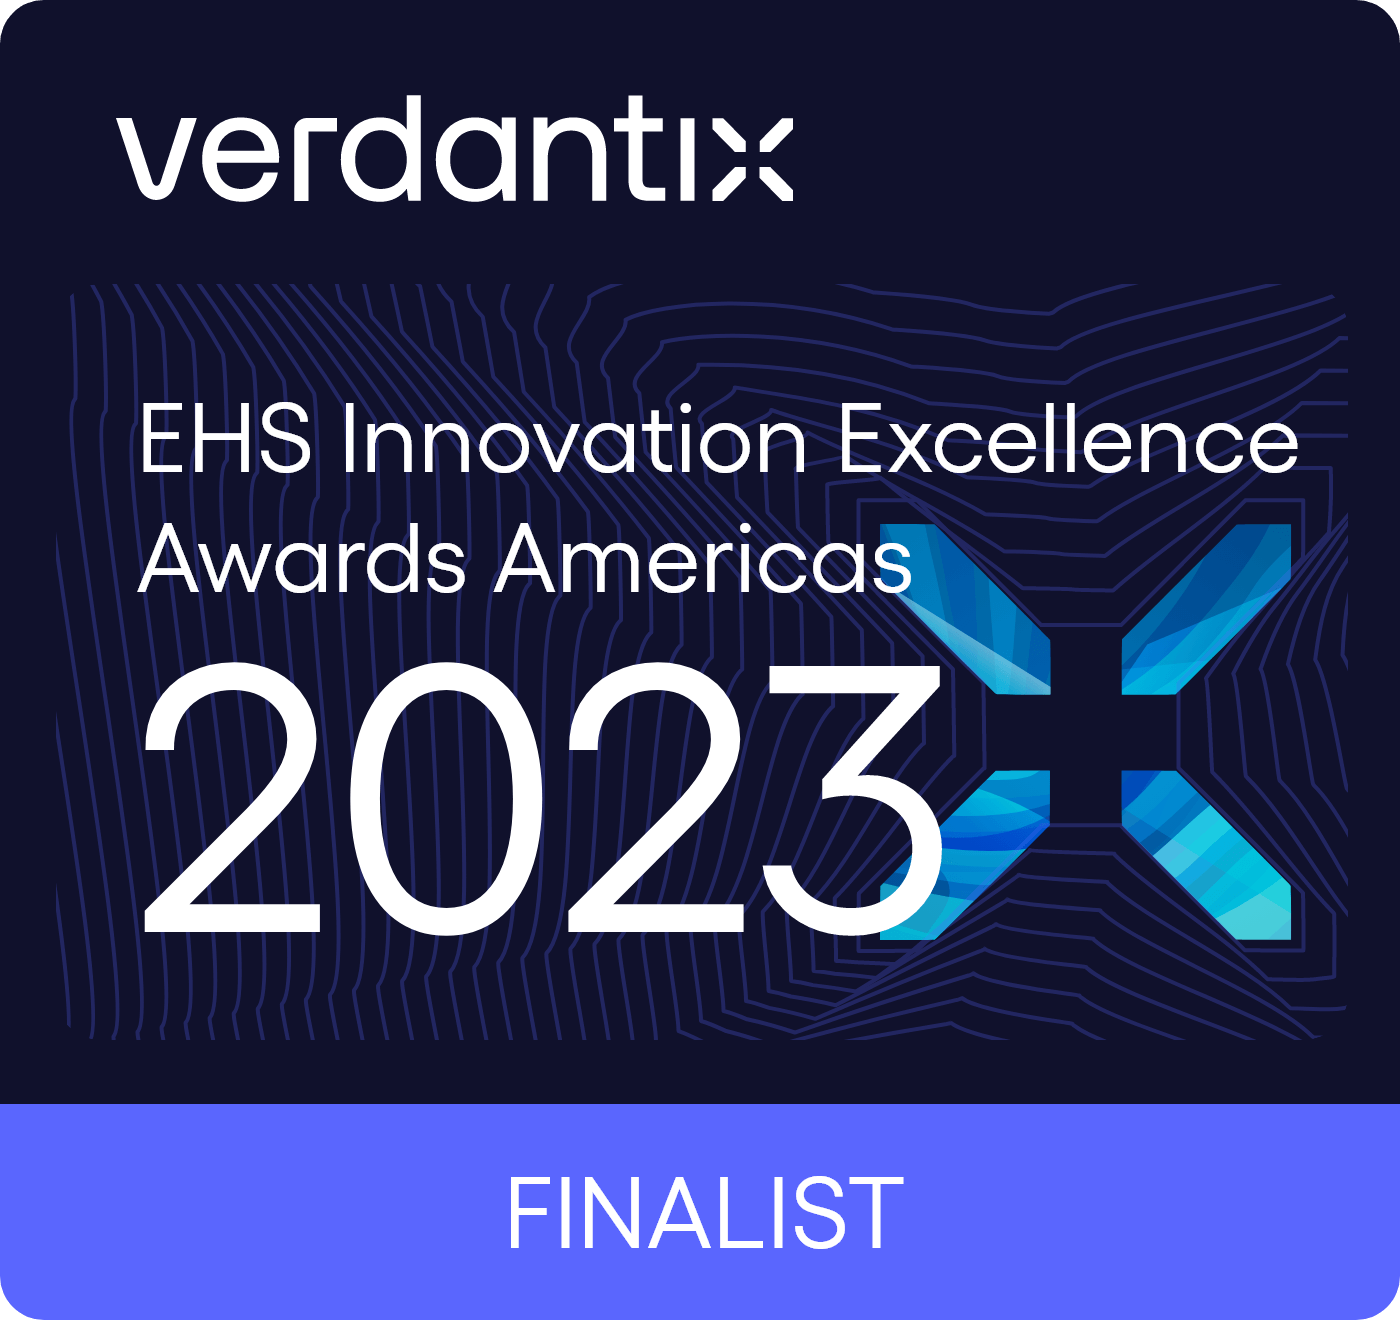 2023 – EHS Innovation Excellence Awards North America: Safety Performance Improvement